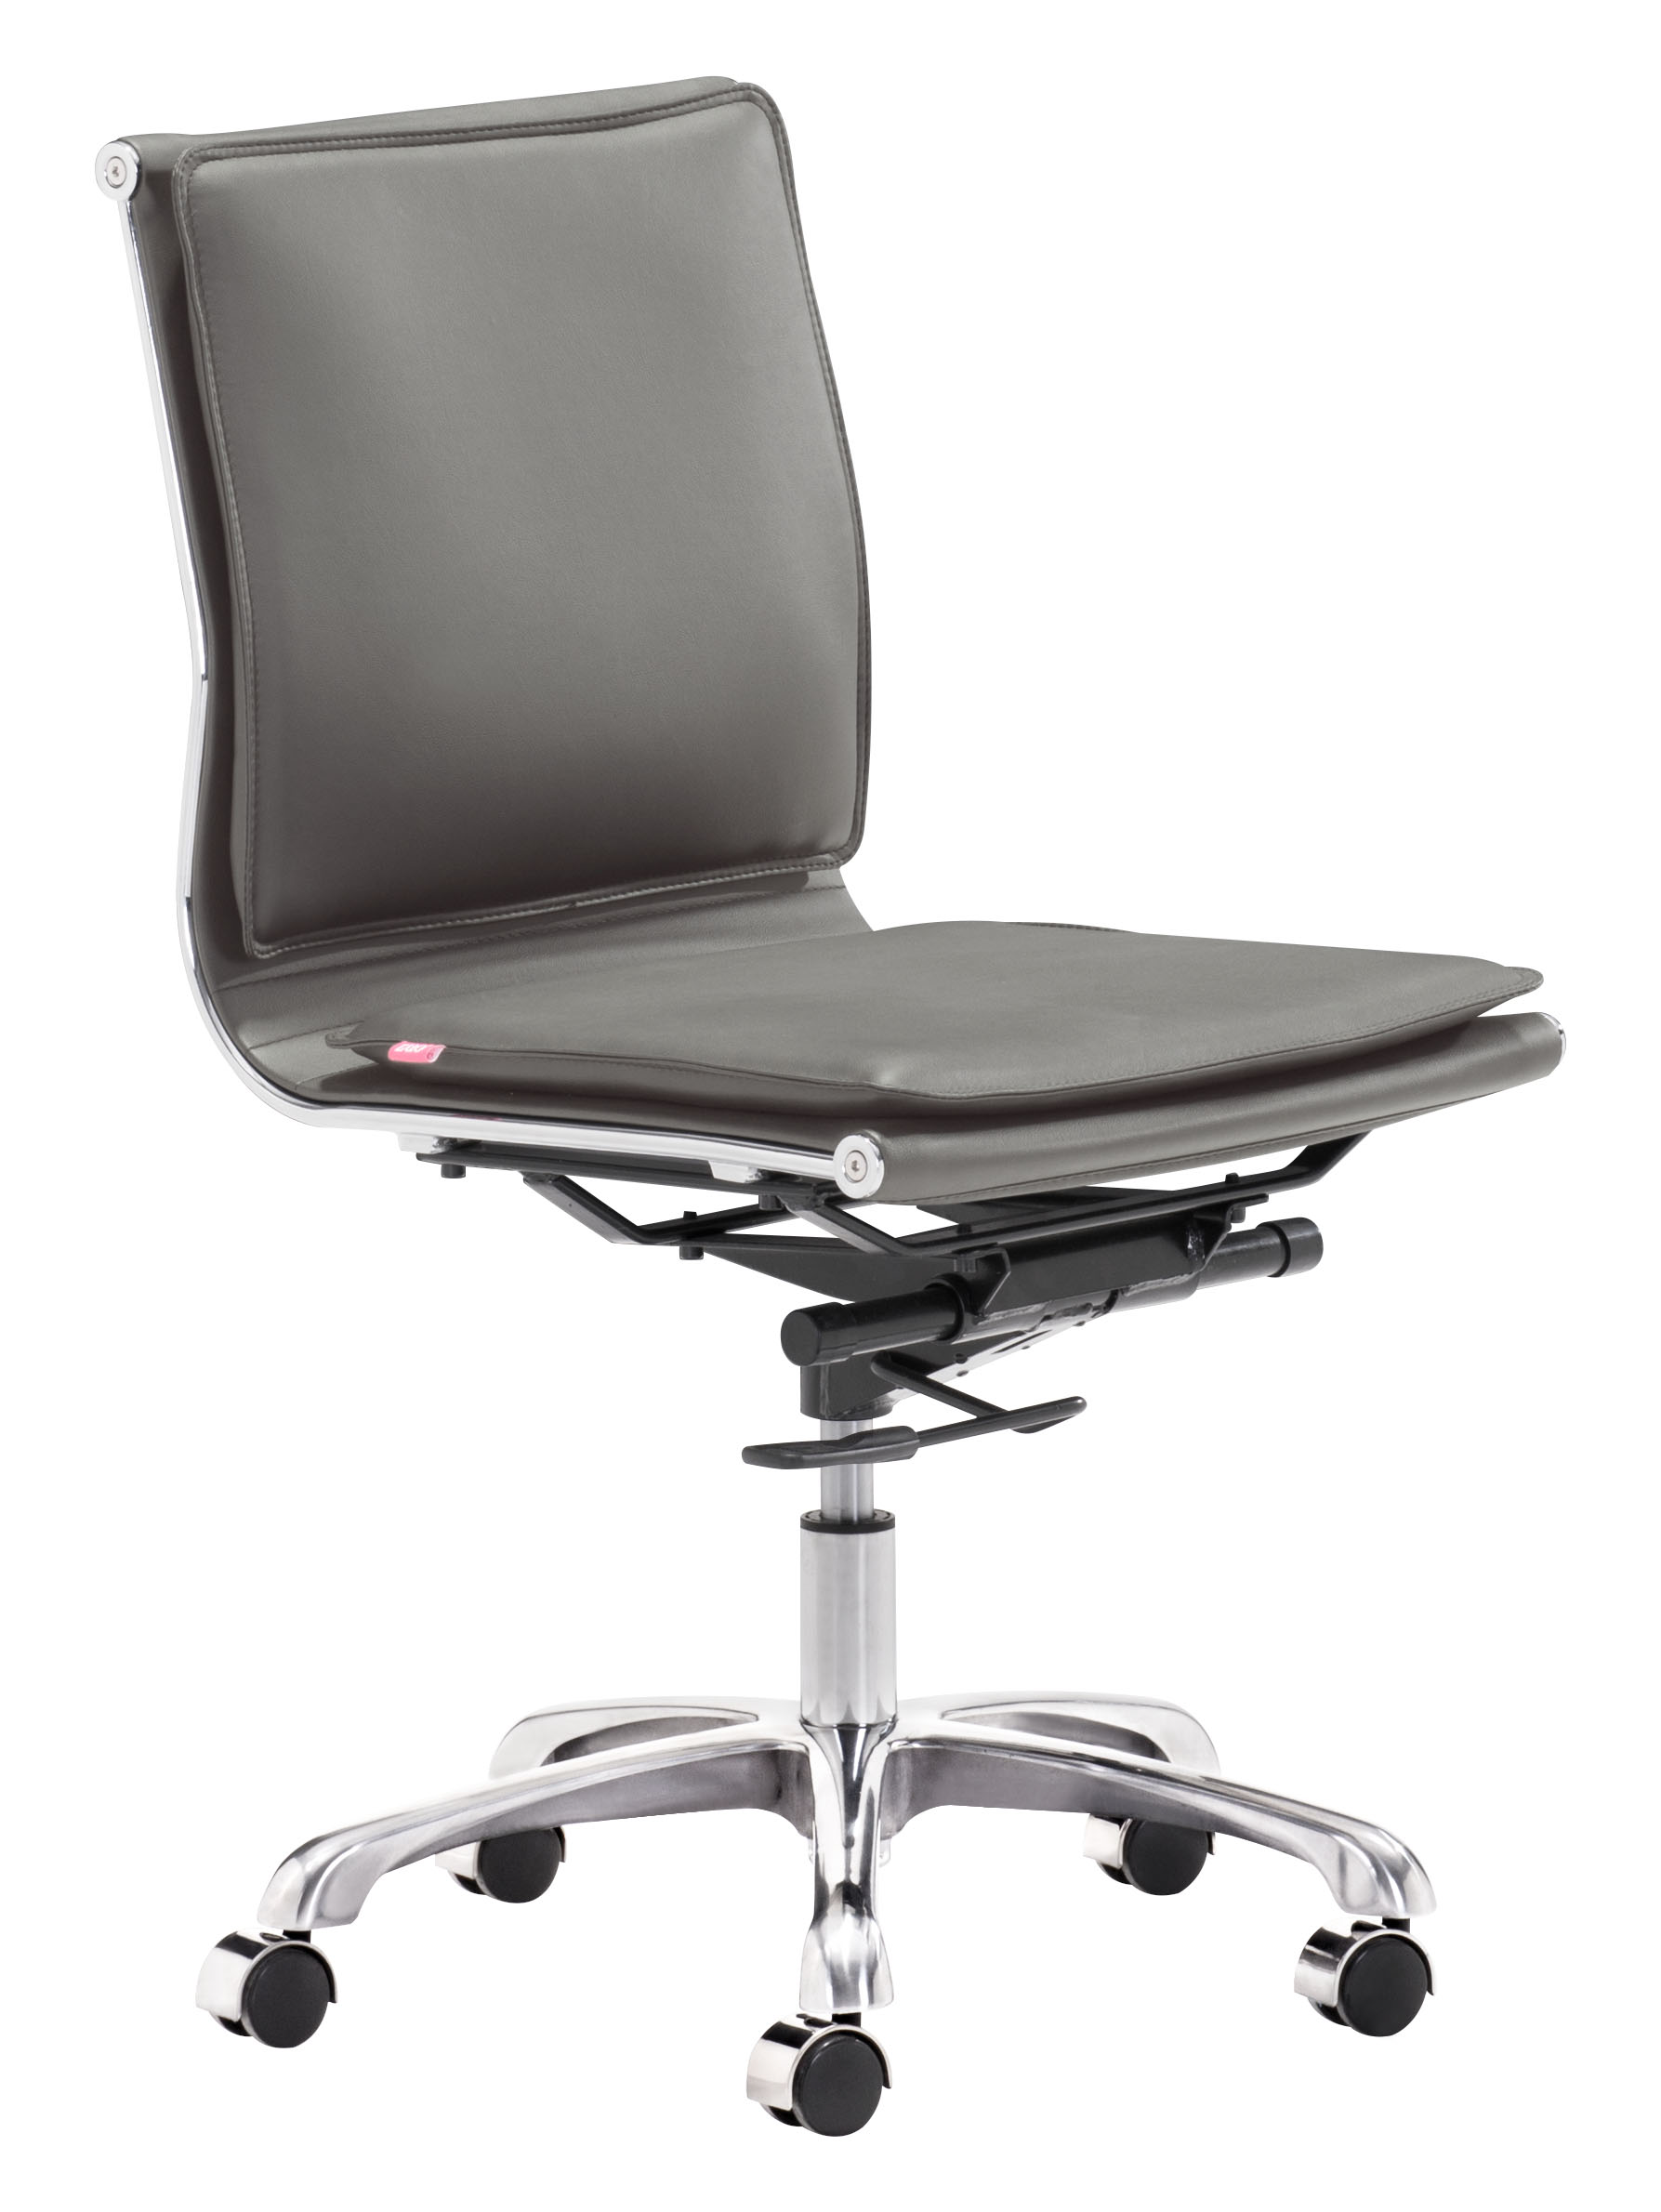 Lider Plus Armless Office Chair Gray by Zuo Modern